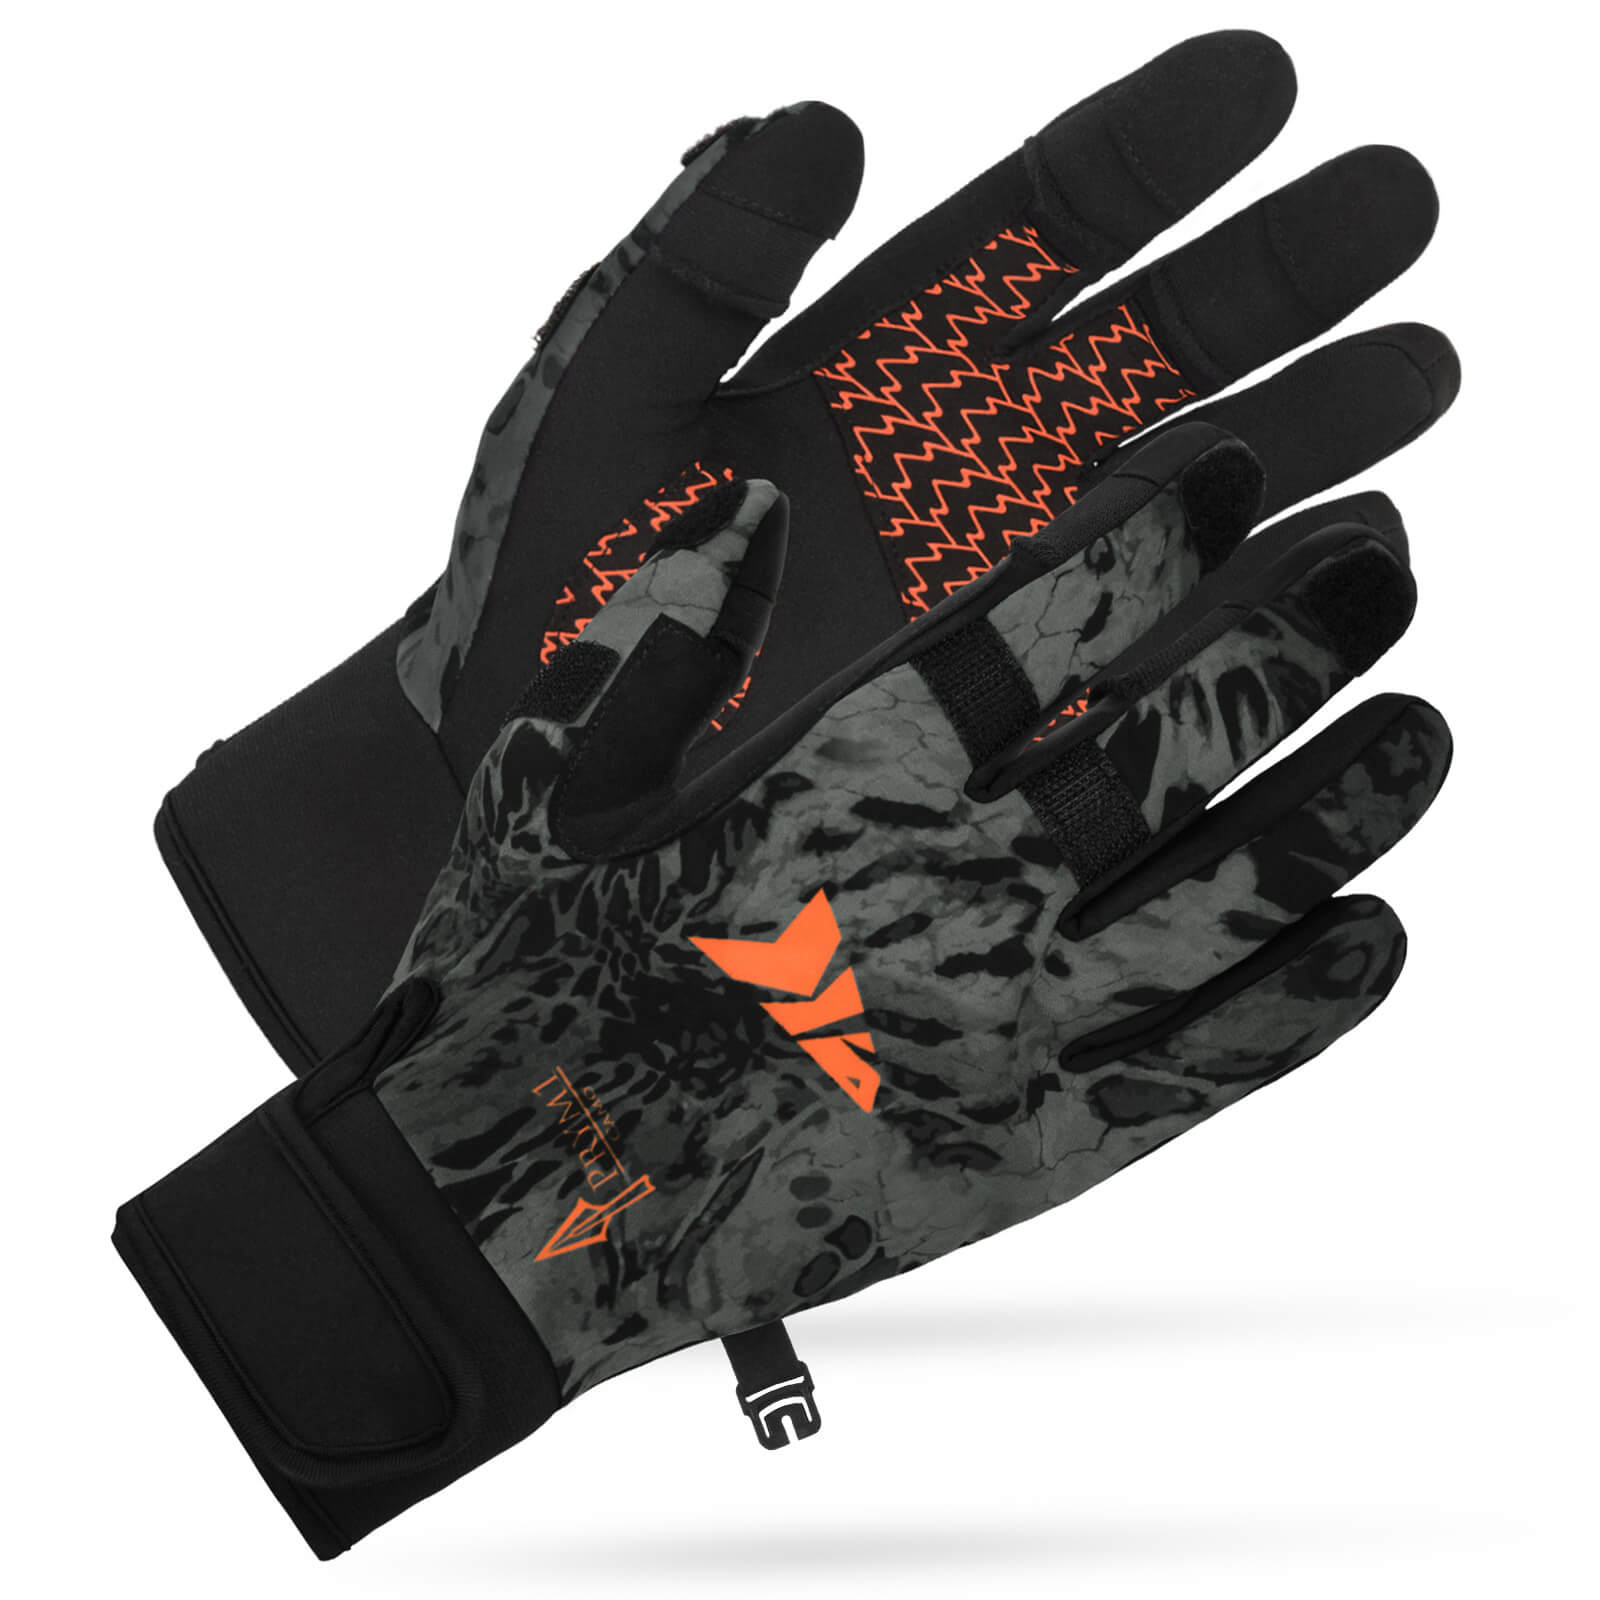 Reel Strikers - Have you tried one of these #kastking #mountain #mist  #neoprene #gloves with Soft Neoprene #palm #fleece #lined #waterproof and  #windproof #polyester for #winter #fishing ???